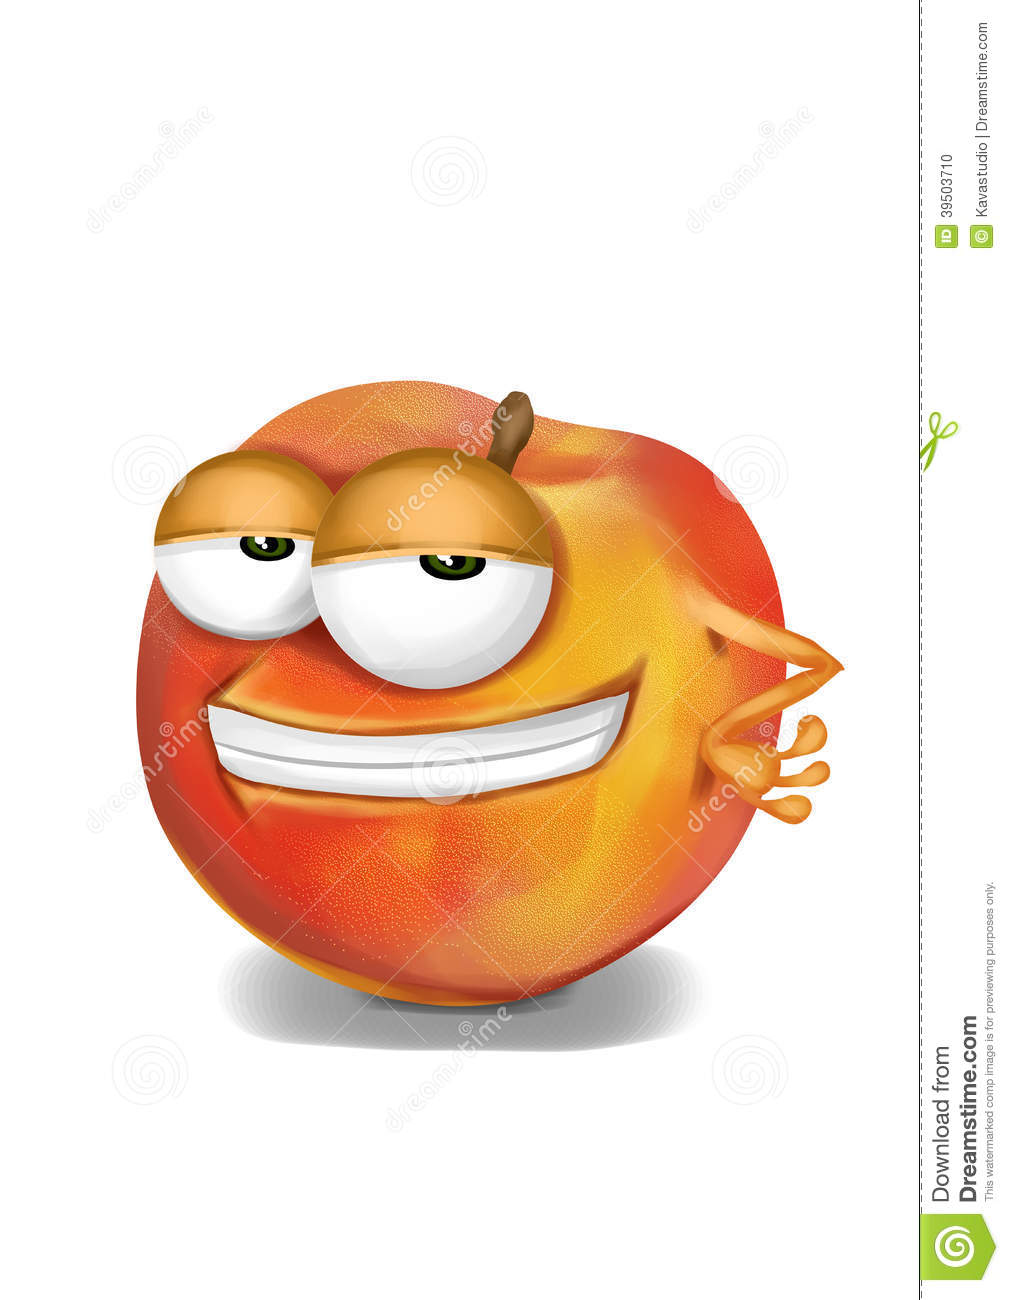 Cool Yellow Peach Cartoon Character Sly Eyes Stock Illustration